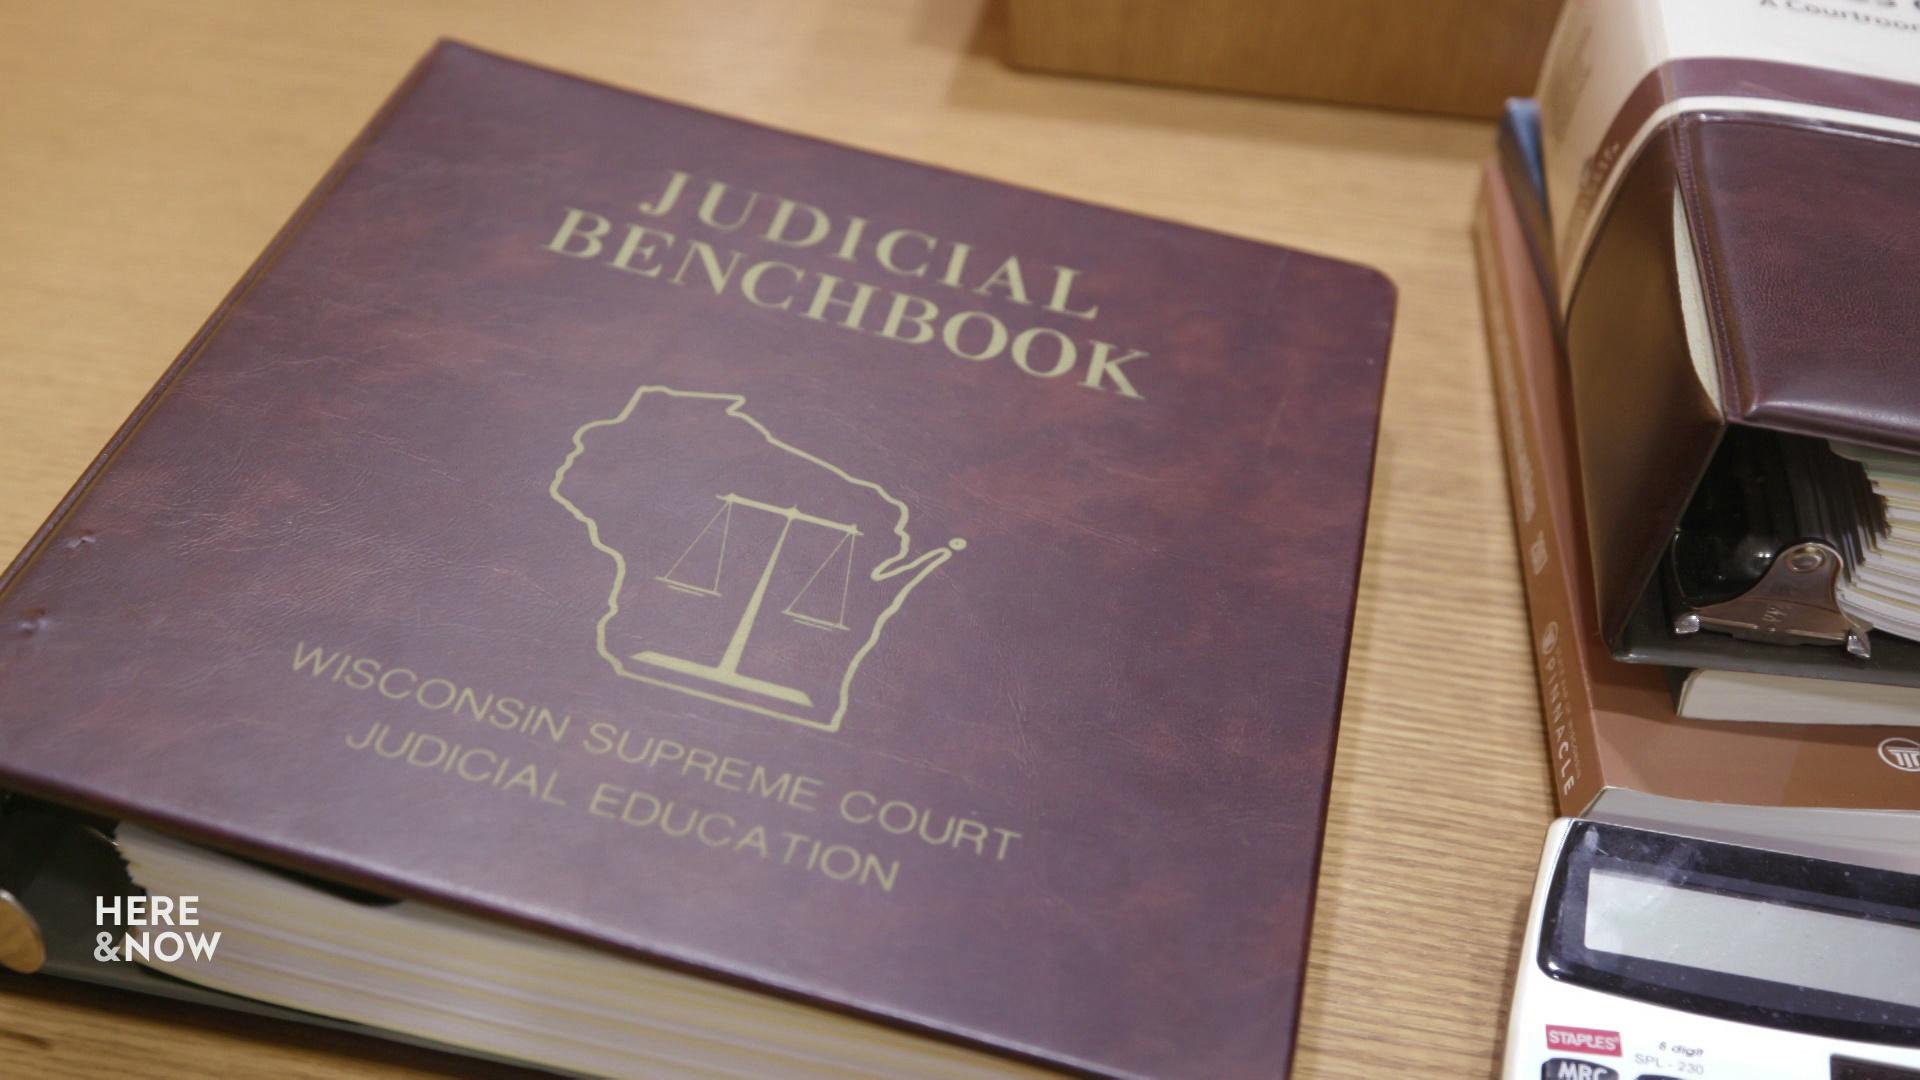 A still image from a video shows a book with a cover featuring an outline of Wisconsin and the words 'Judicial Benchbook' and 'Wisconsin Supreme Court' and 'Judicial Education.'